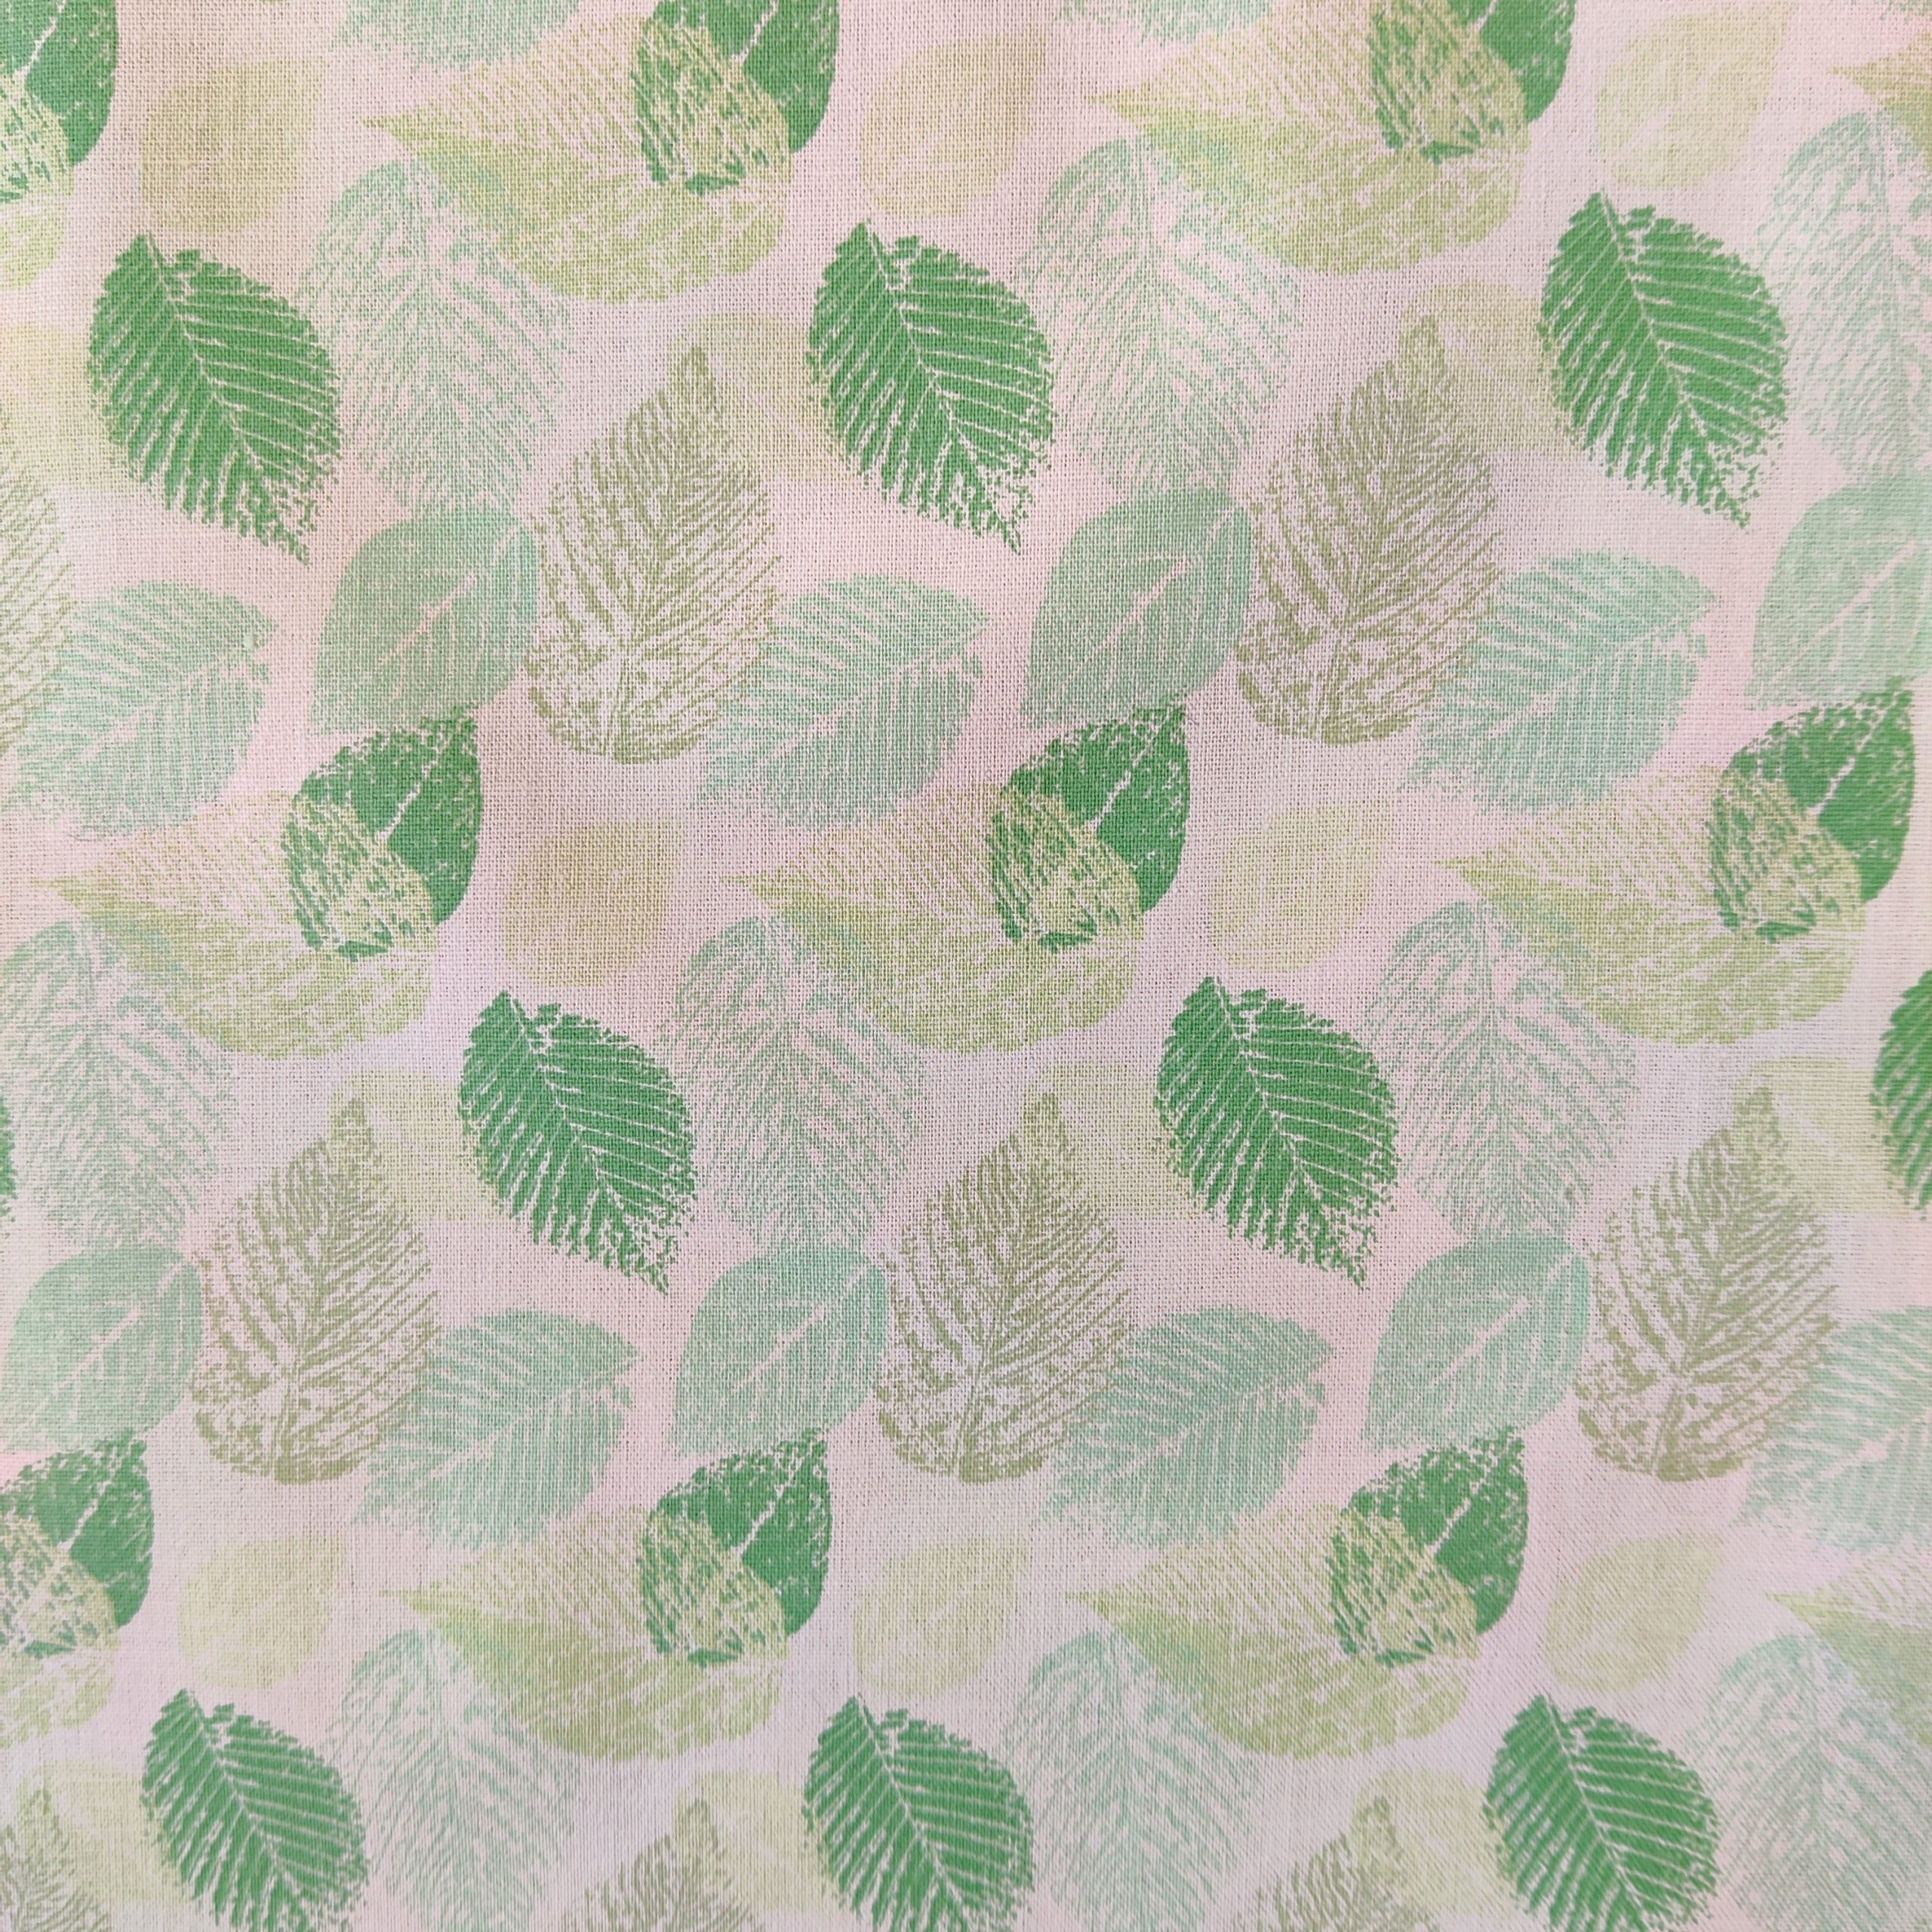 eye pillow fabric in green leaves design